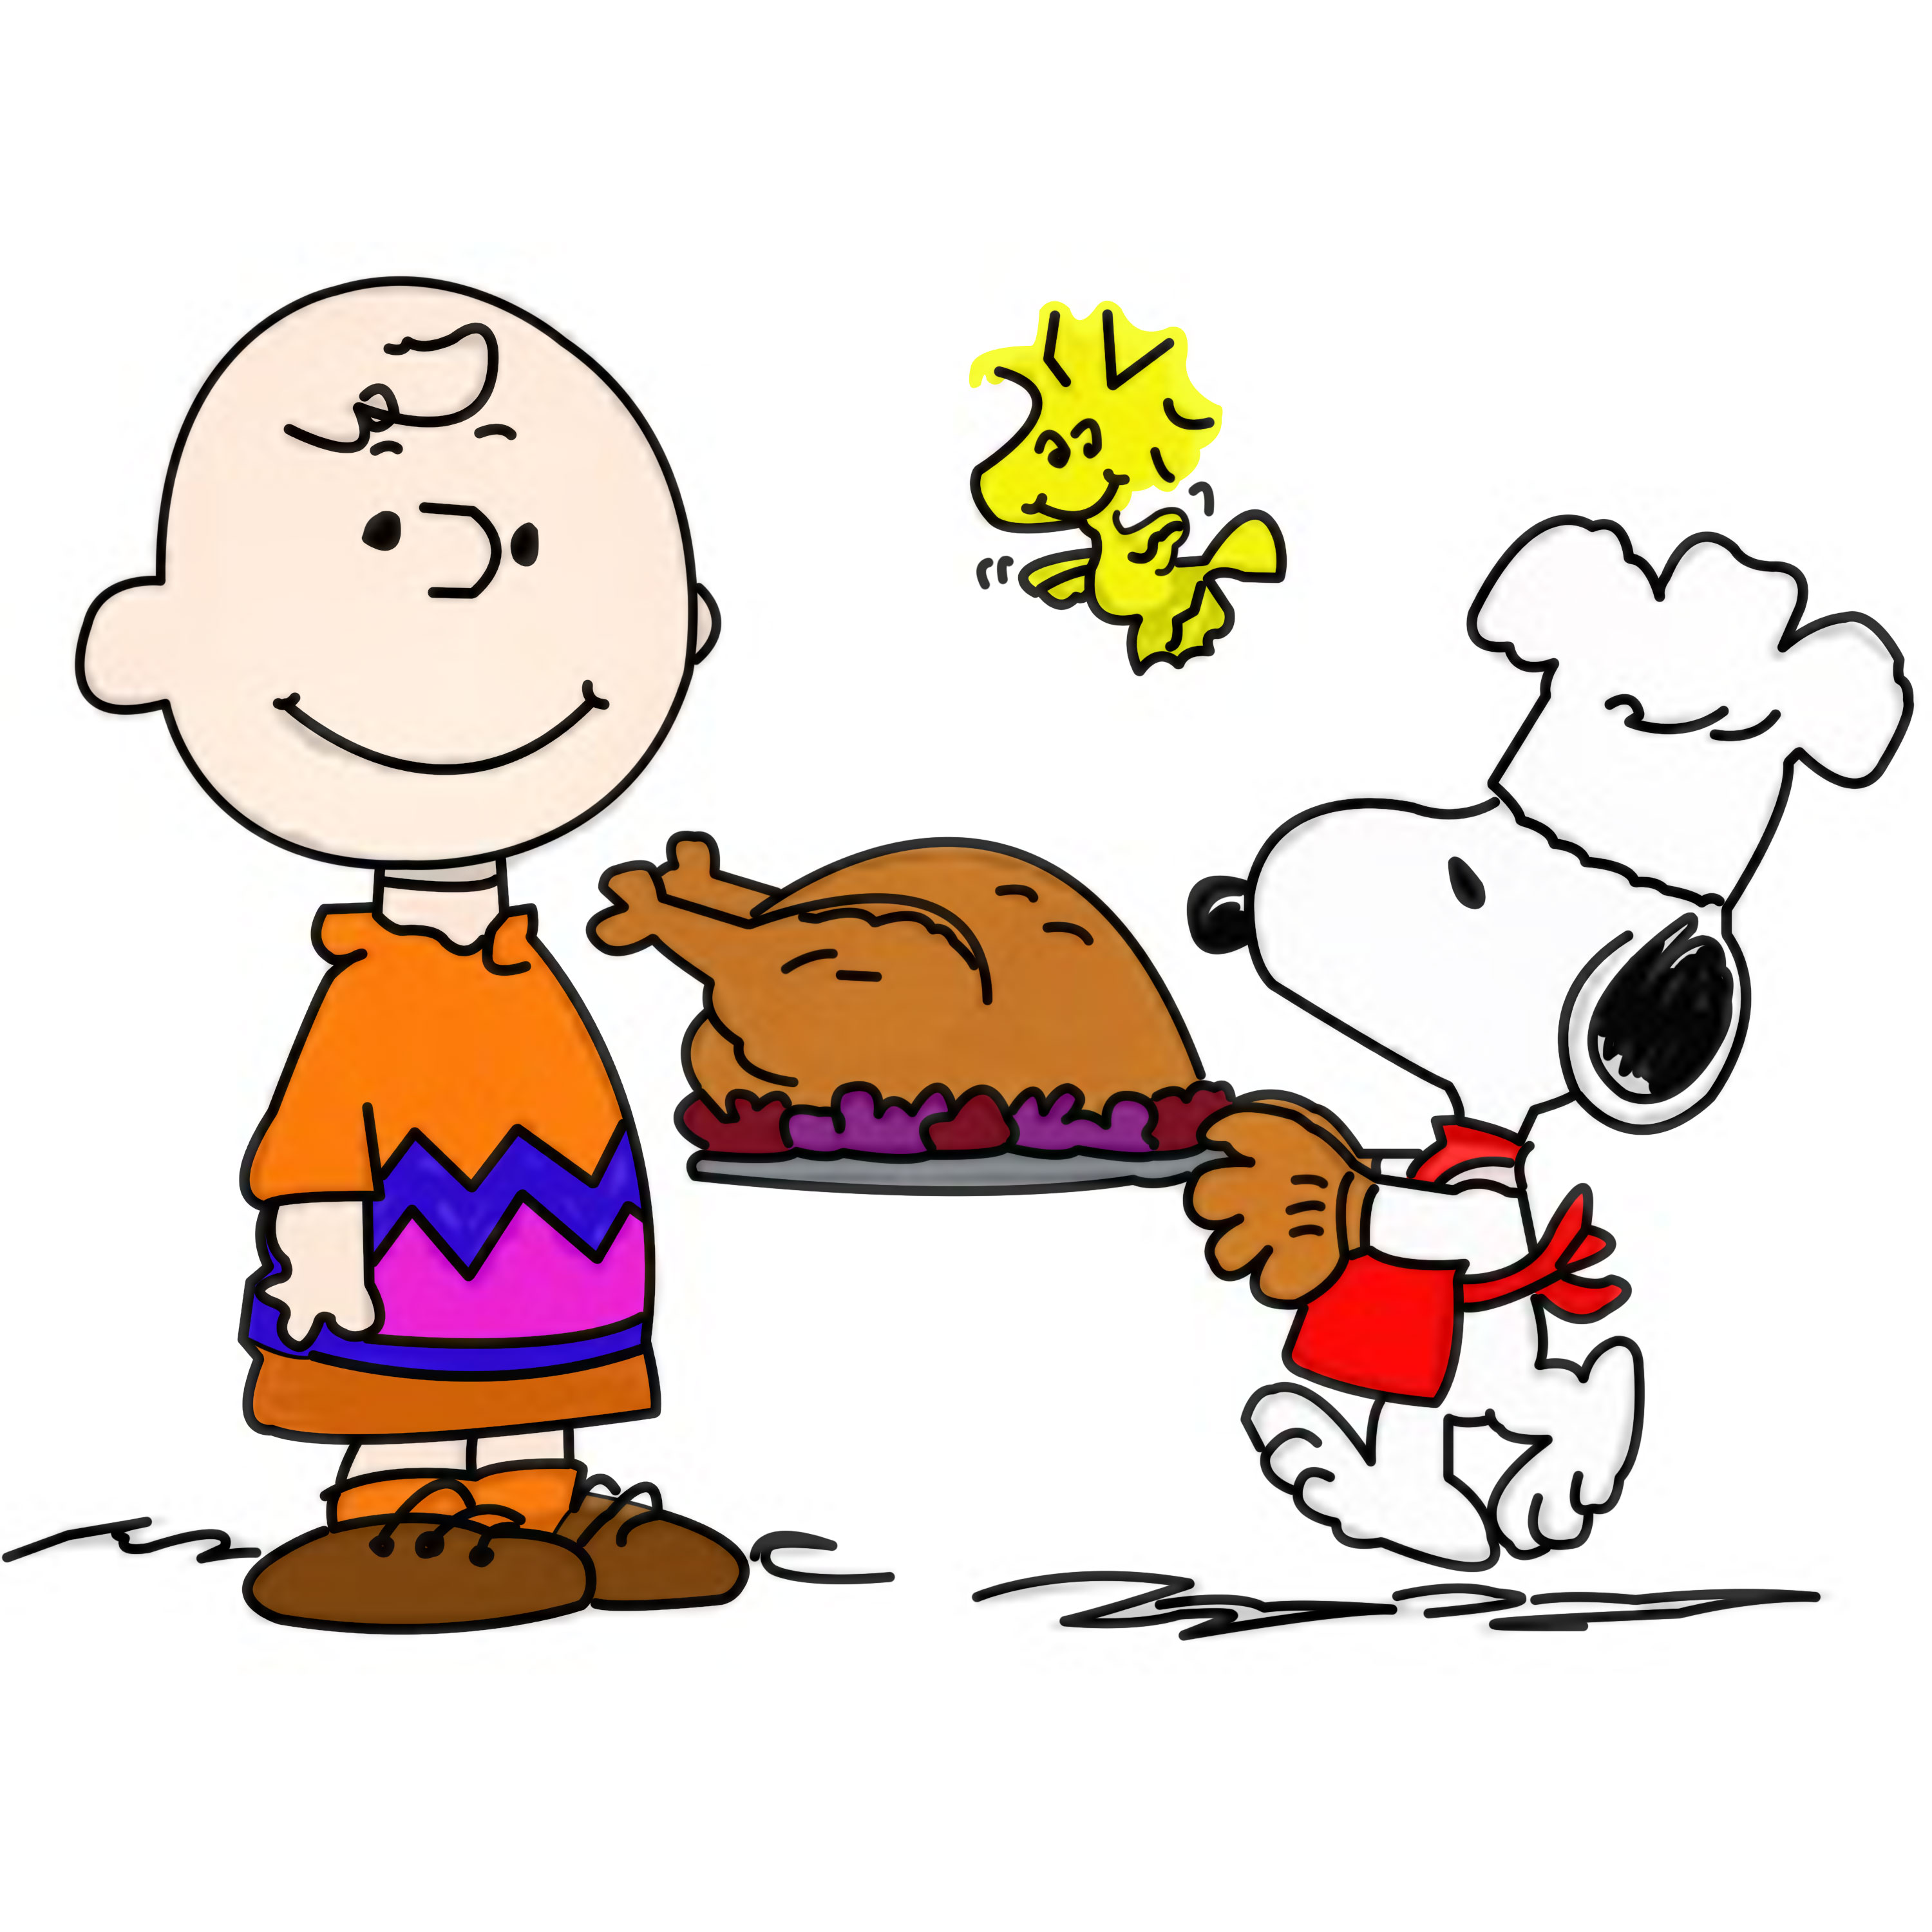 Free Charlie Brown Clipart Download Free Charlie Brown Clipart Png Images.....